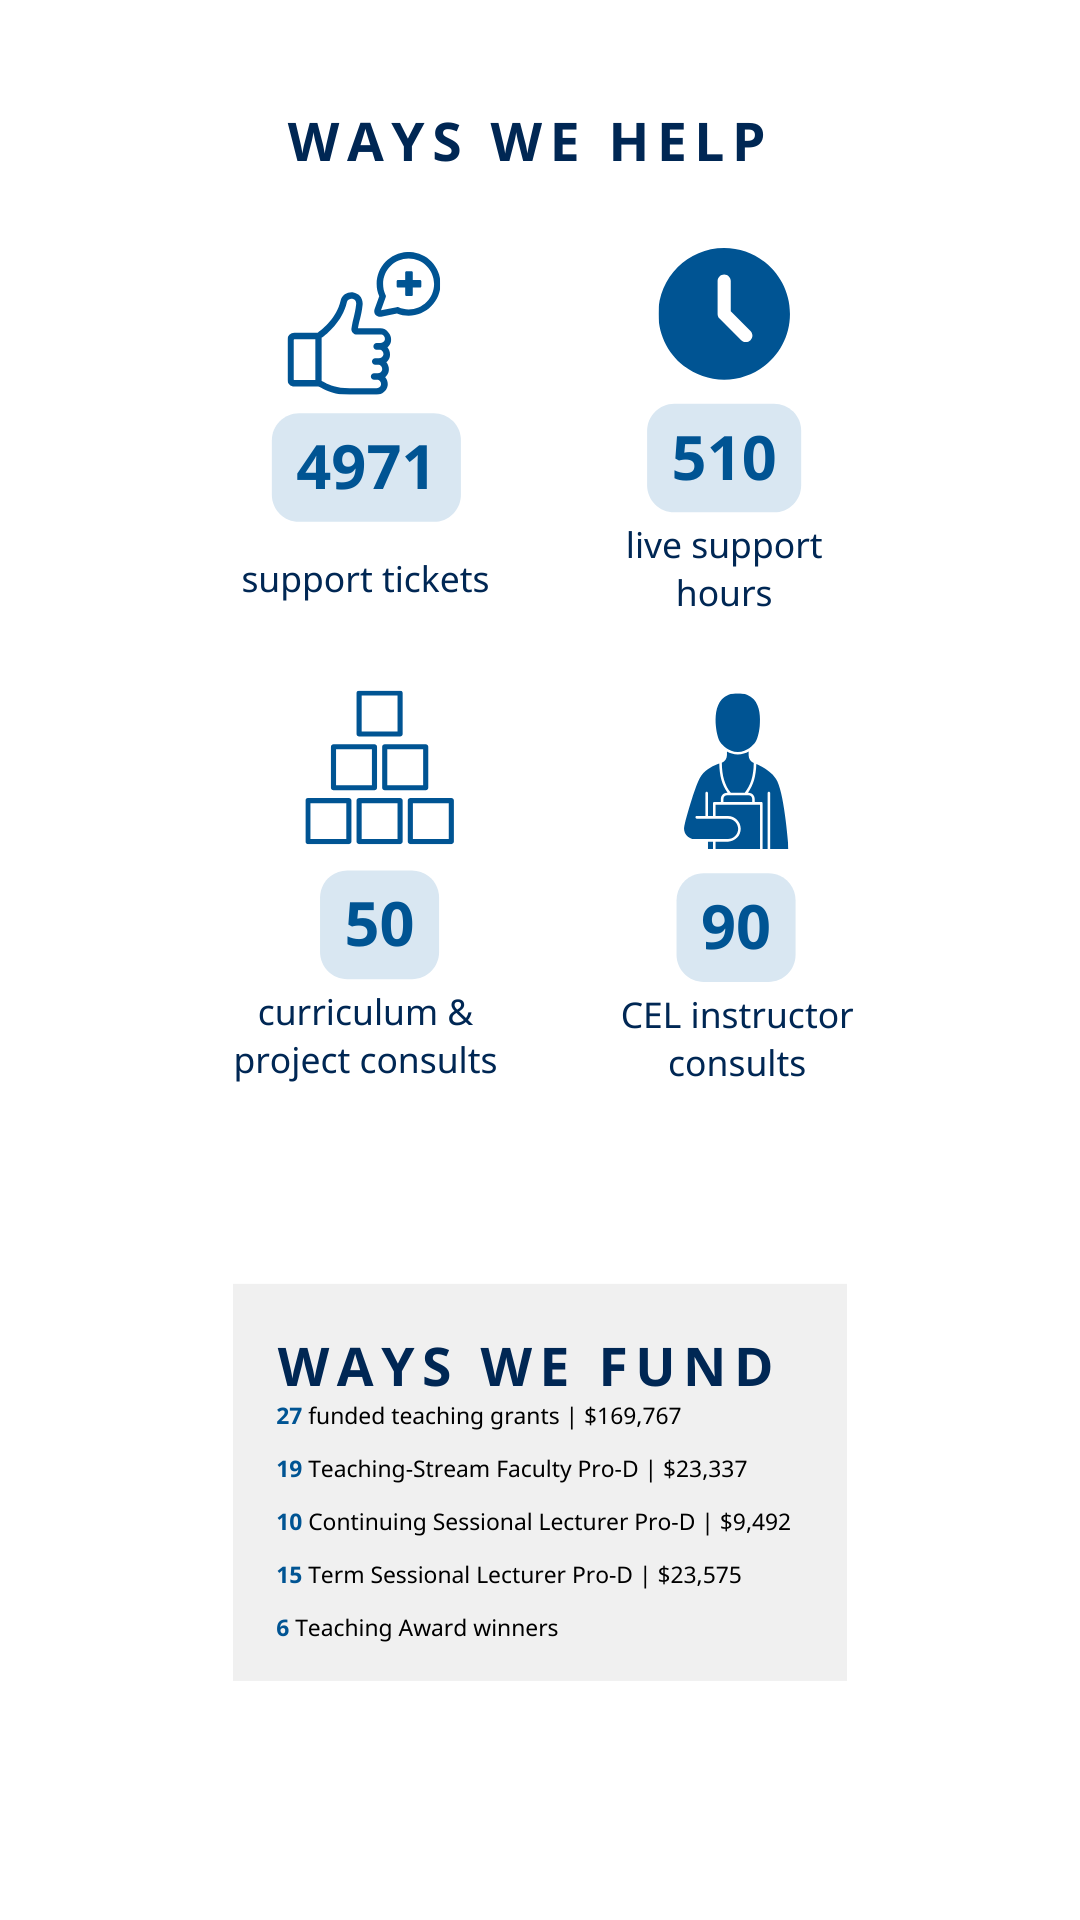 A graphic divided into two sections titled 'WAYS WE FUND' and 'WAYS WE HELP.' On the left, 'WAYS WE FUND' lists various educational grants and their amounts, such as '27 funded teaching grants | $169,767,' and several professional development grants for faculty and lecturers. On the right, 'WAYS WE HELP' uses icons and arrows to represent different support services, with '4971 support tickets,' '510 live support hours,' '50 curriculum & project consults,' and '90 CEL instructor consults.